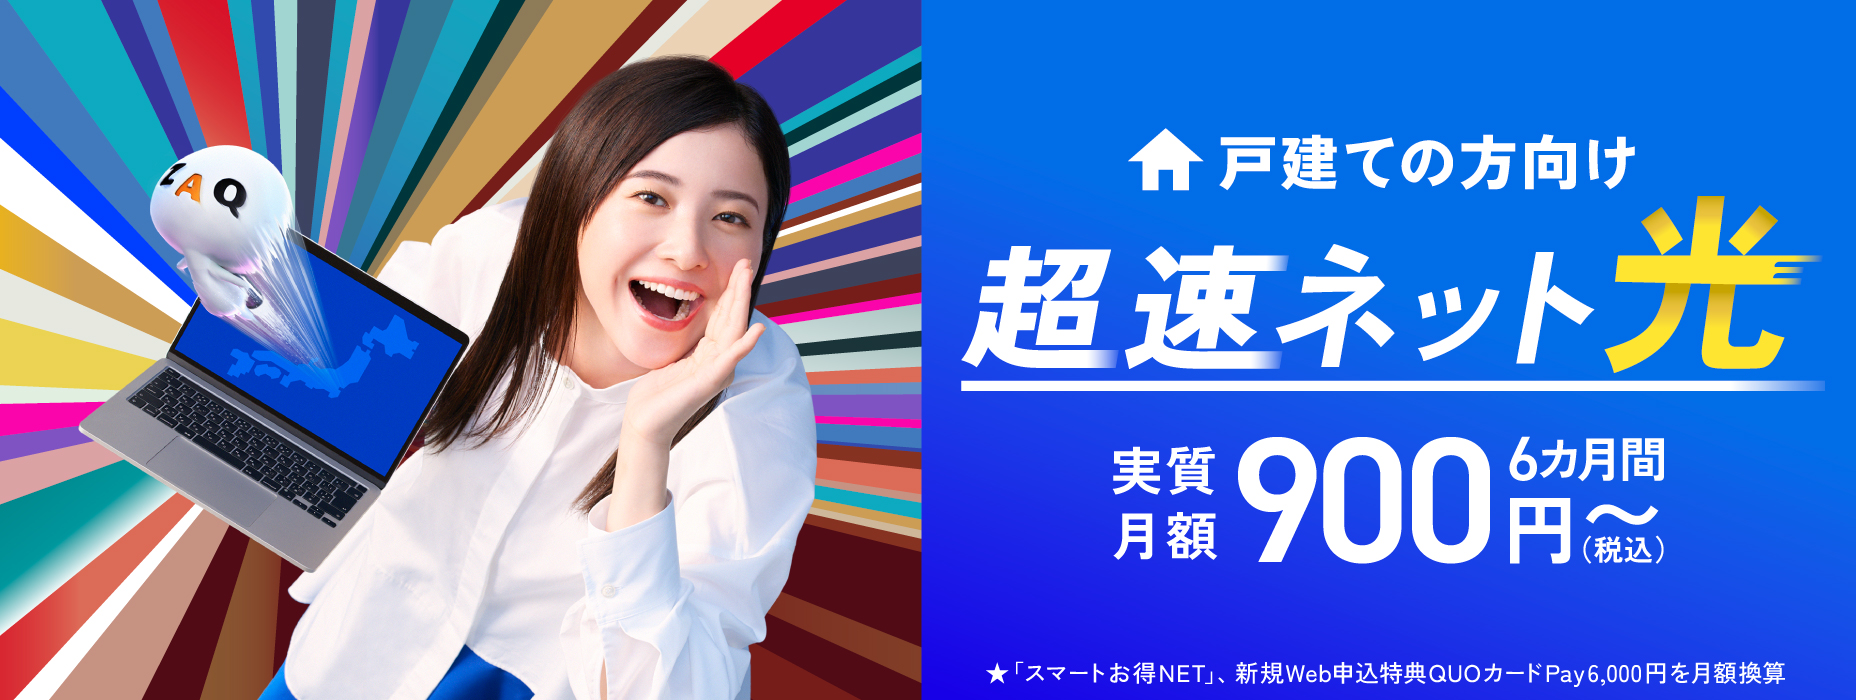 Chosoku Net Hikari for single-family homes Effectively 900 yen per month (tax included) for 6 months ~ "Smart OTOKU NET", New web application privilege QUO card Pay 6,000 yen monthly conversion